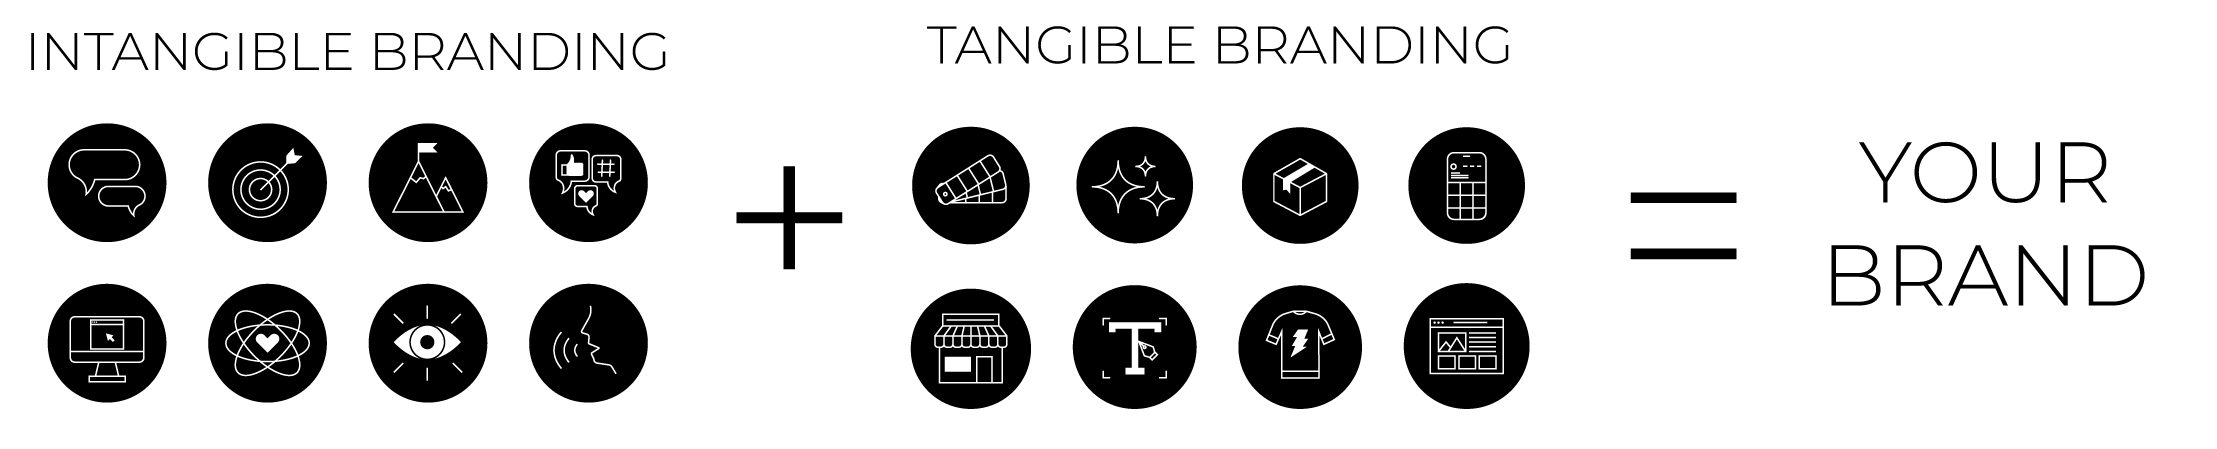 Intangible Branding + Tangible Branding = Your Brand Blog Graphic